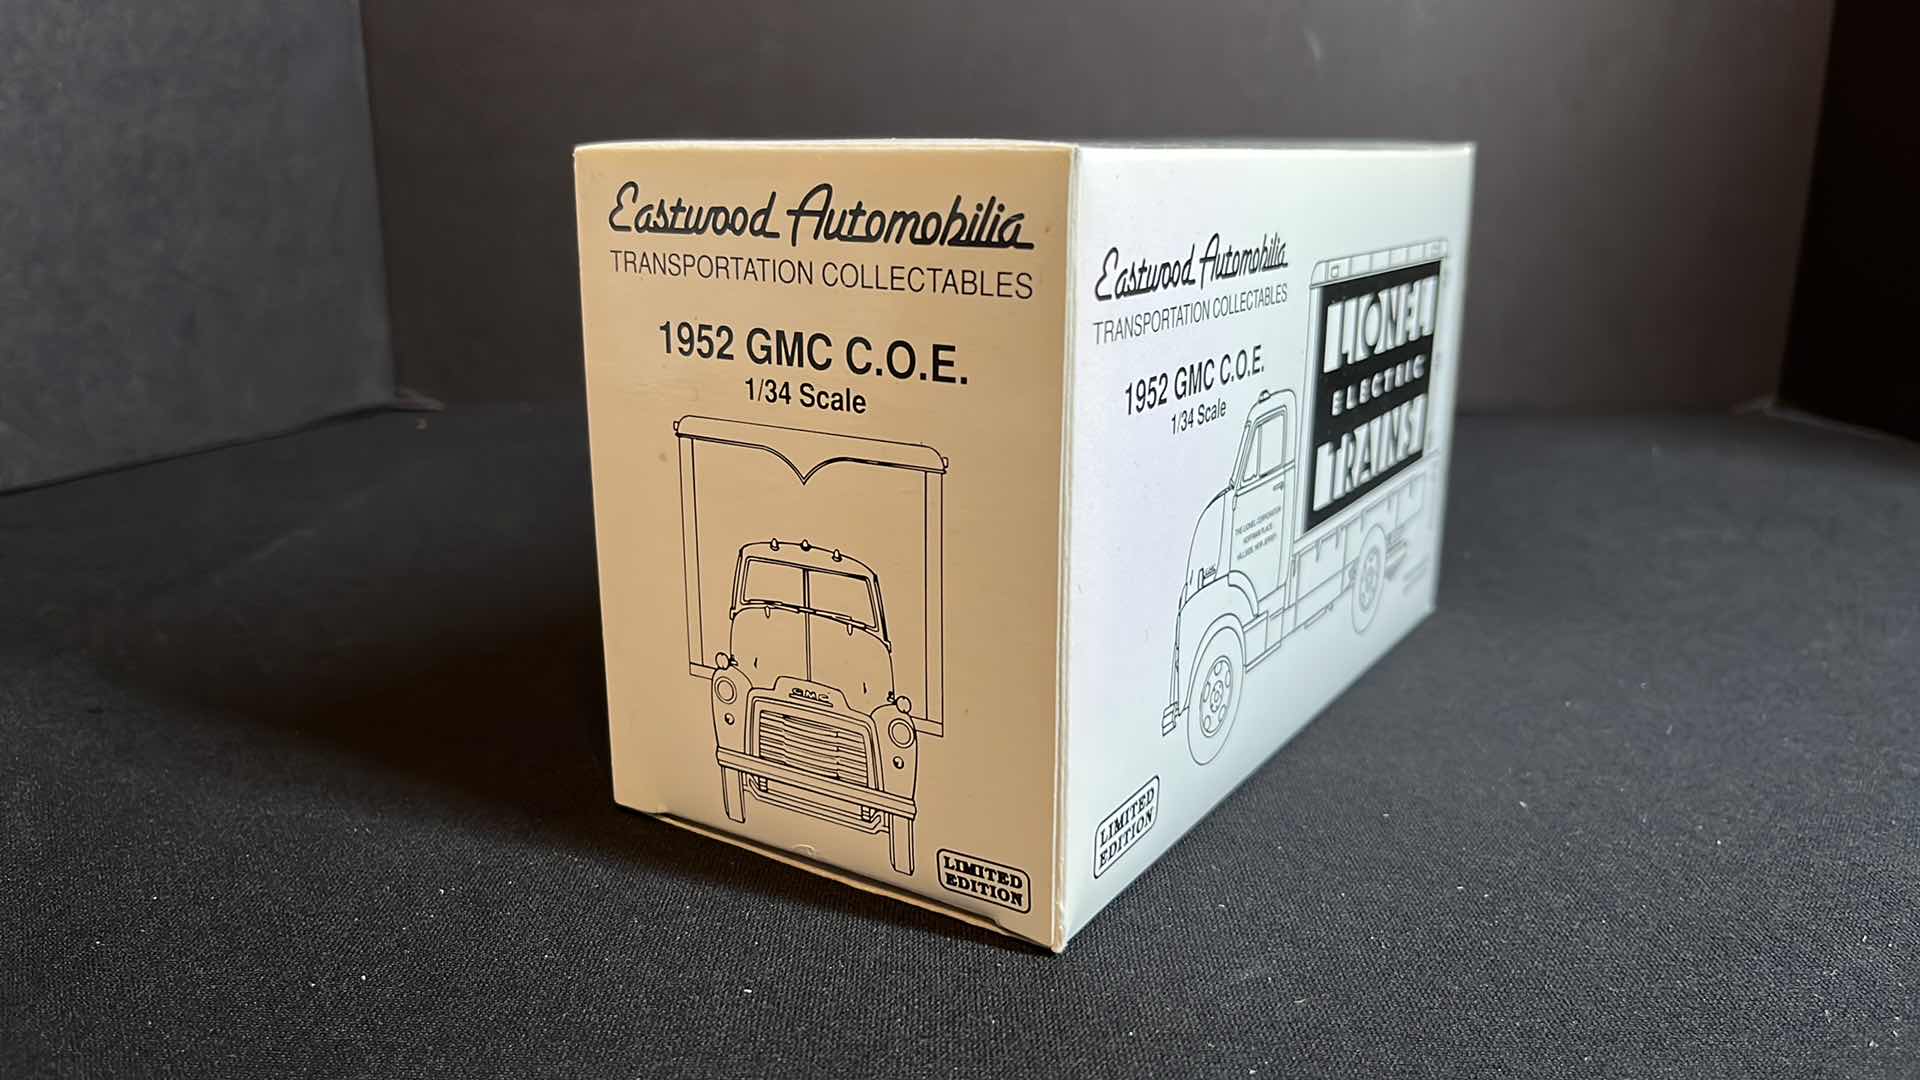 Photo 8 of NIB FIRST GEAR INC EASTWOOD AUTOMOBILIA TRANSPORTATION COLLECTABLES LIONEL ELECTRIC TRAINS DIE-CAST METAL 1/34 SCALE 1952 GMC C.O.E., 1992 (STOCK #19-0108)